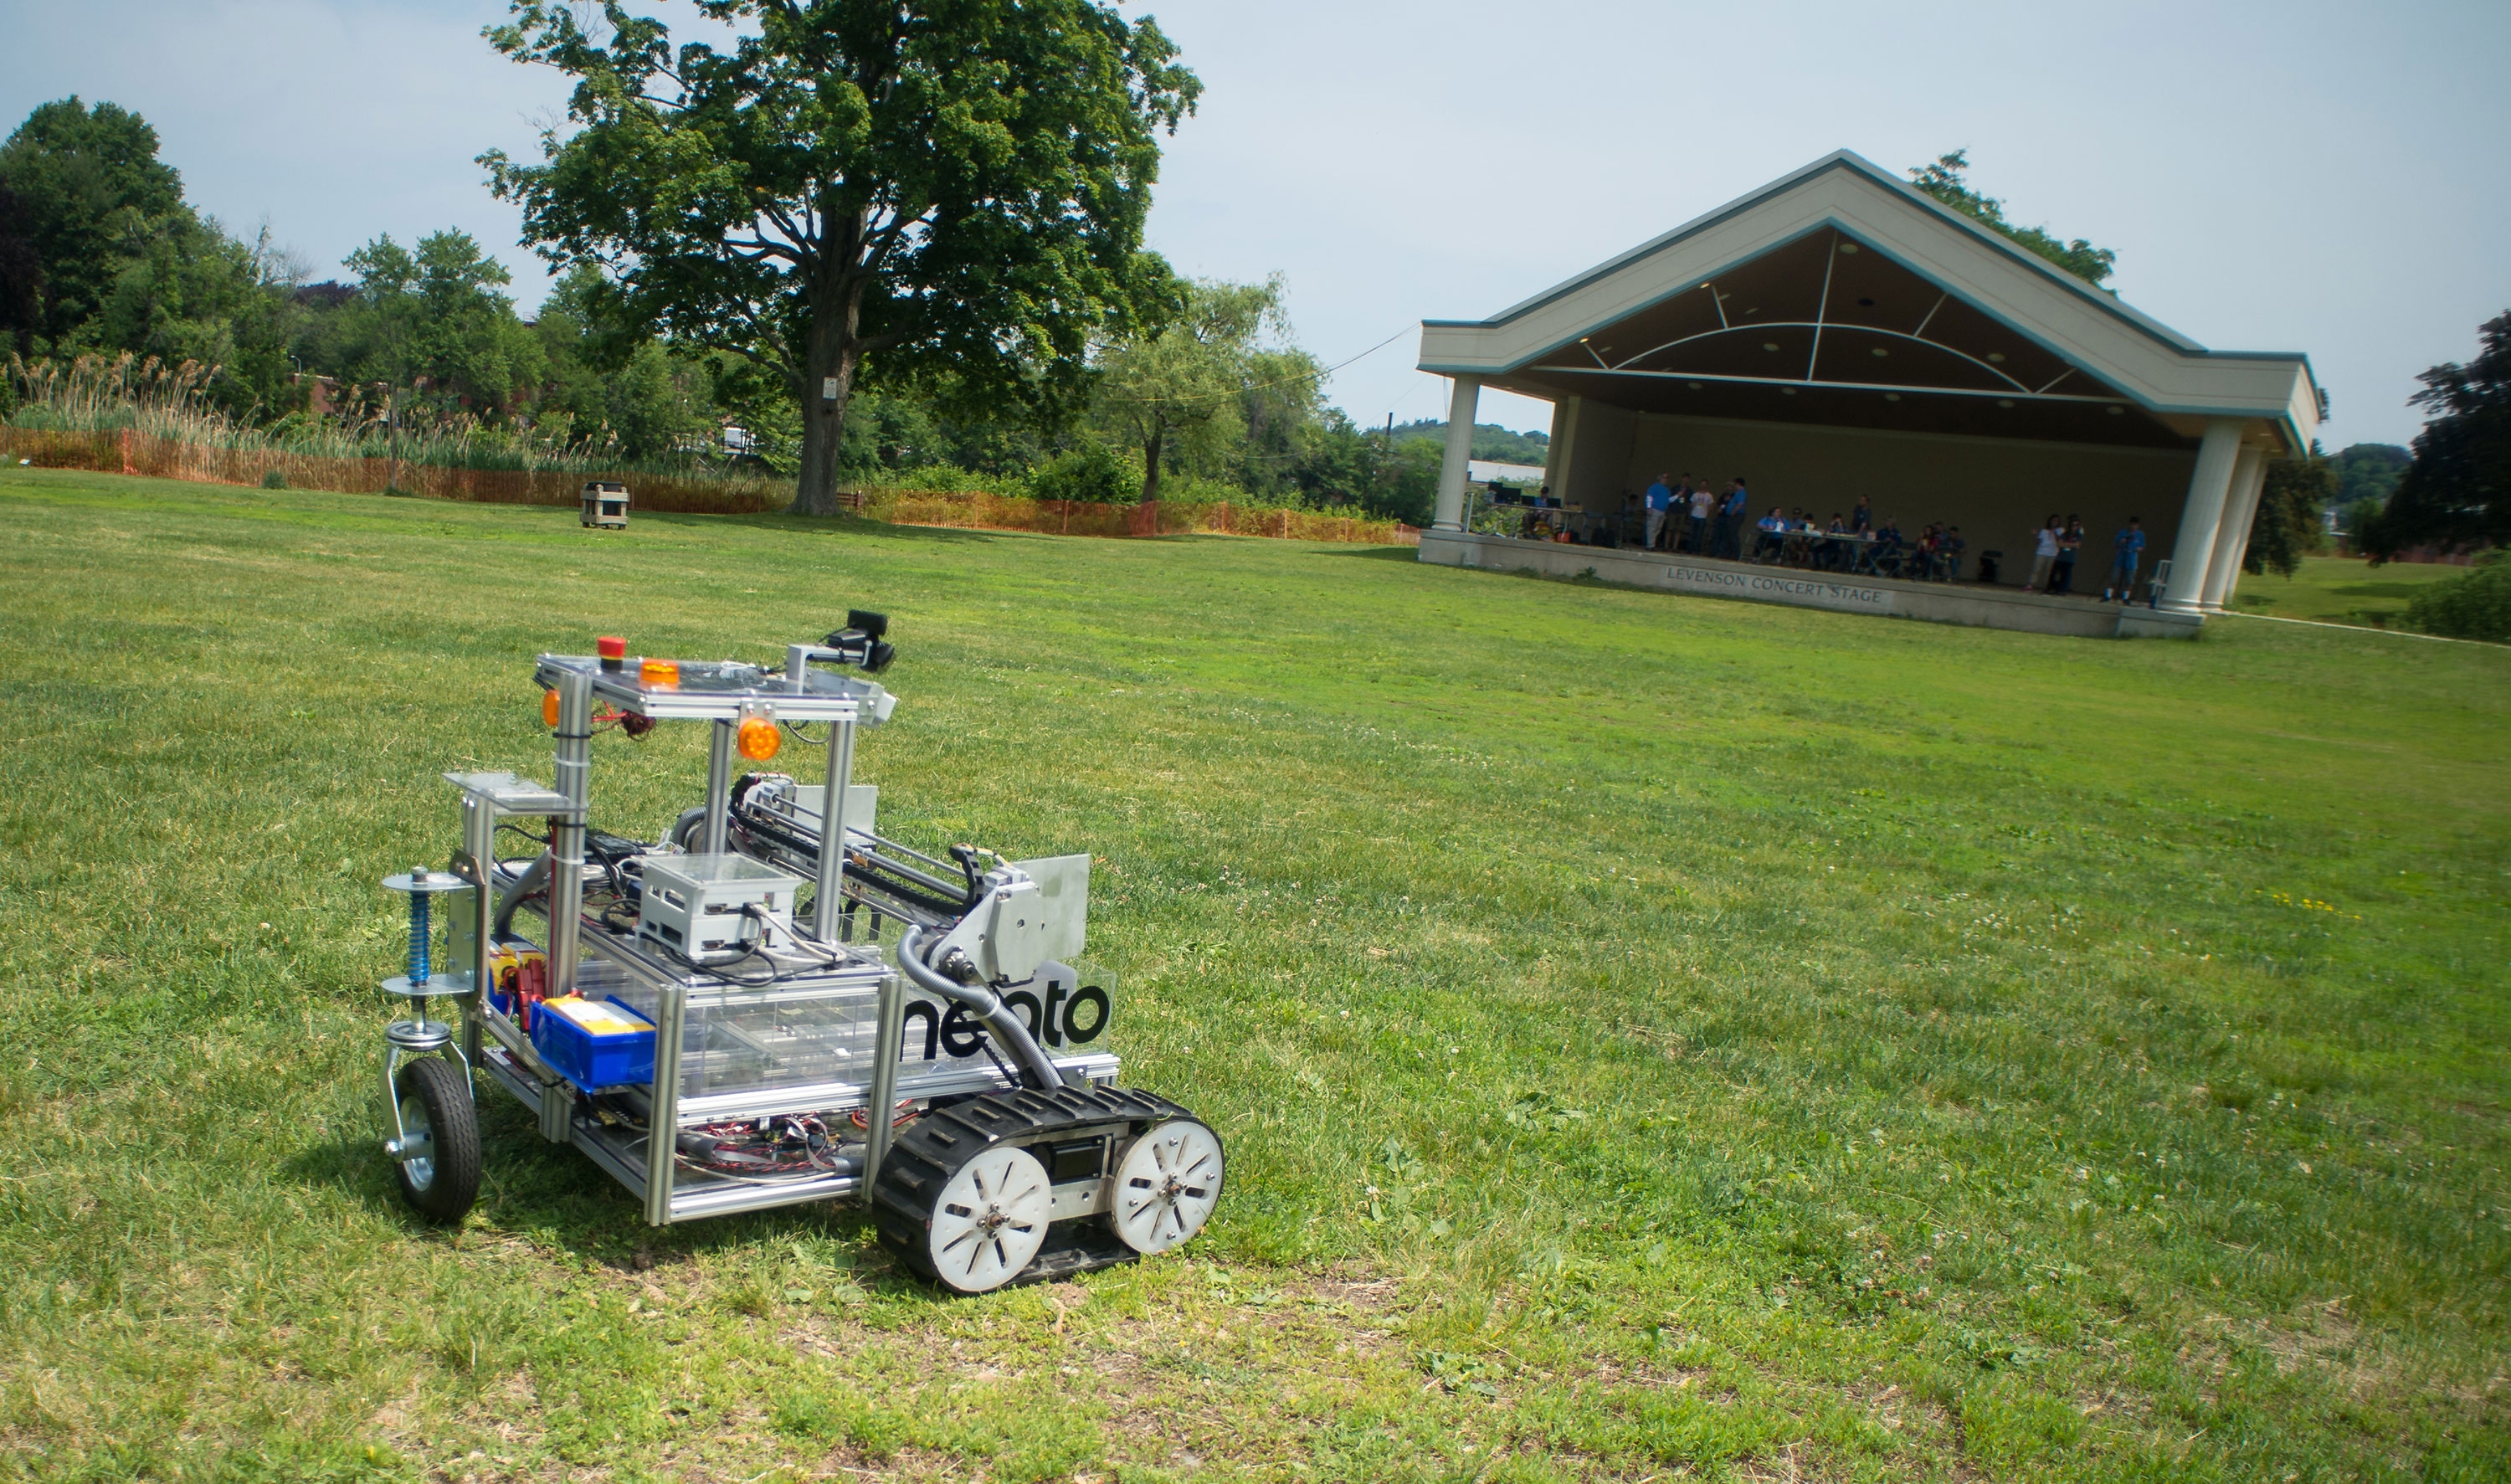 The Army of Angry Robots team robot is seen during a rerun of the level one challenge at the 2015 Sample Return Robot Challenge. Credit: NASA/Joel Kowsky